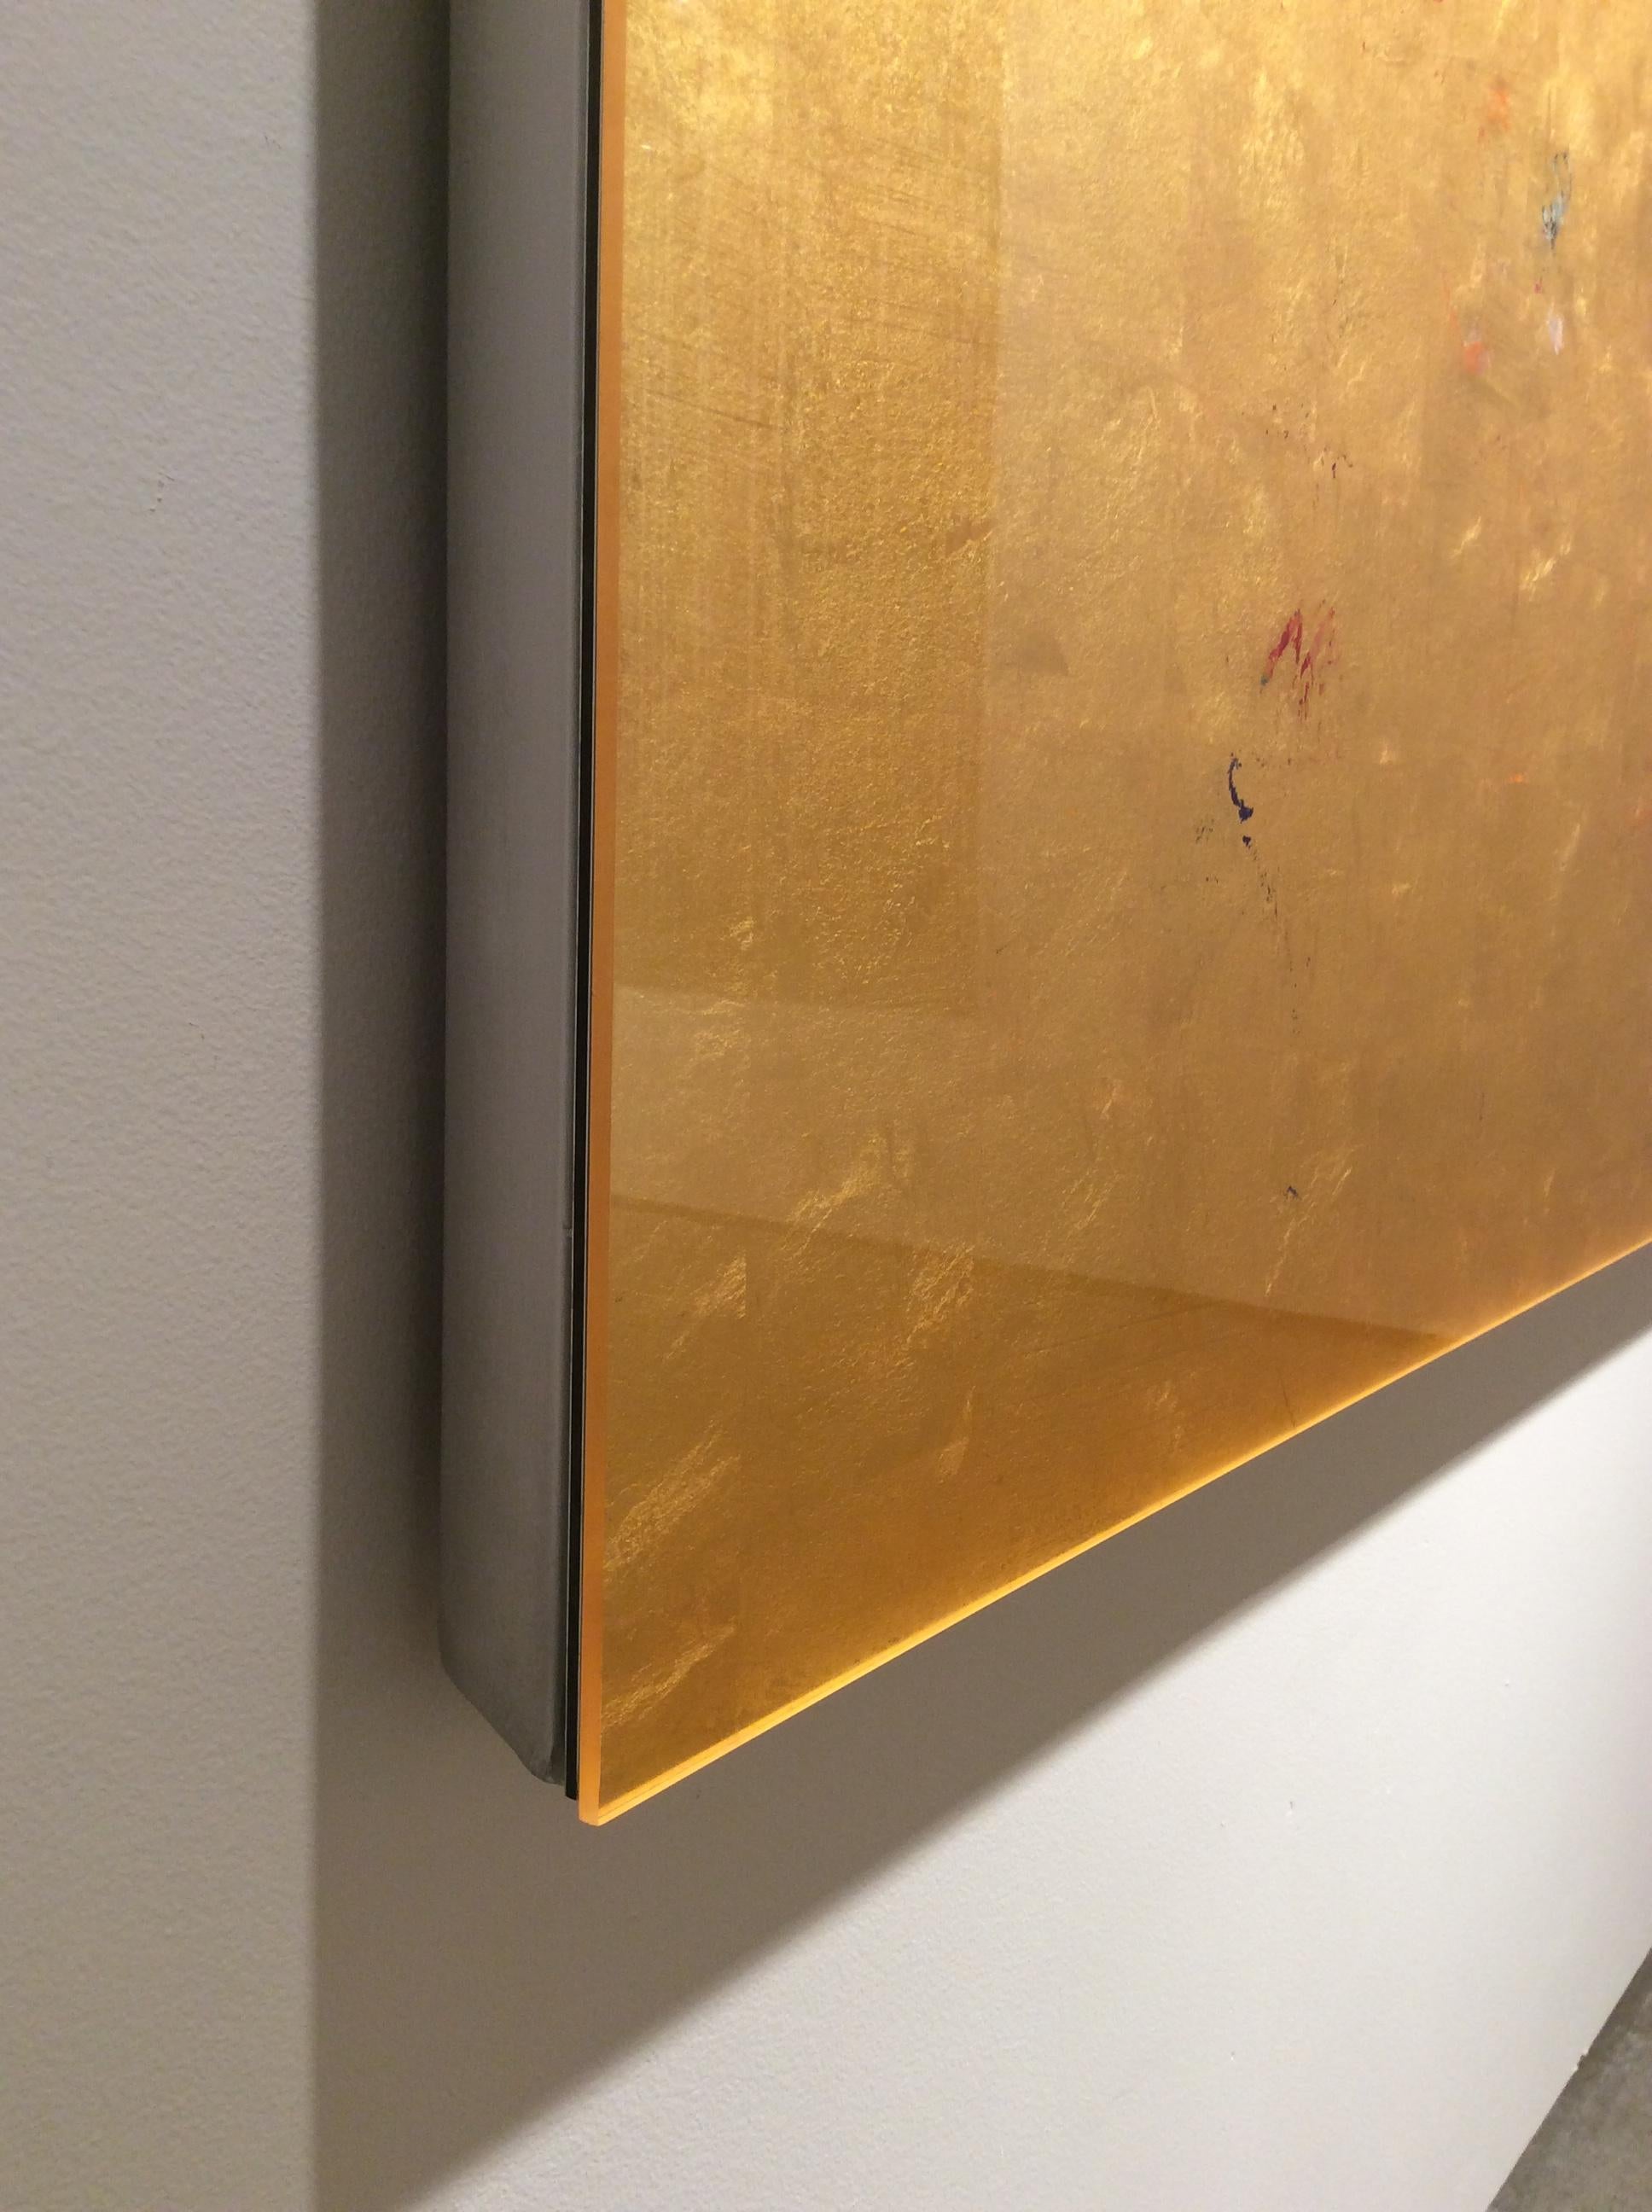 An elegant, behind-glass painting with fine line details in multi-colours on 23,75 ct. gold leaf. Mounted on a deep, aluminum frame. 
Michael Burges explores methods in abstract painting, via his use of oils and metals such as copper, silver and